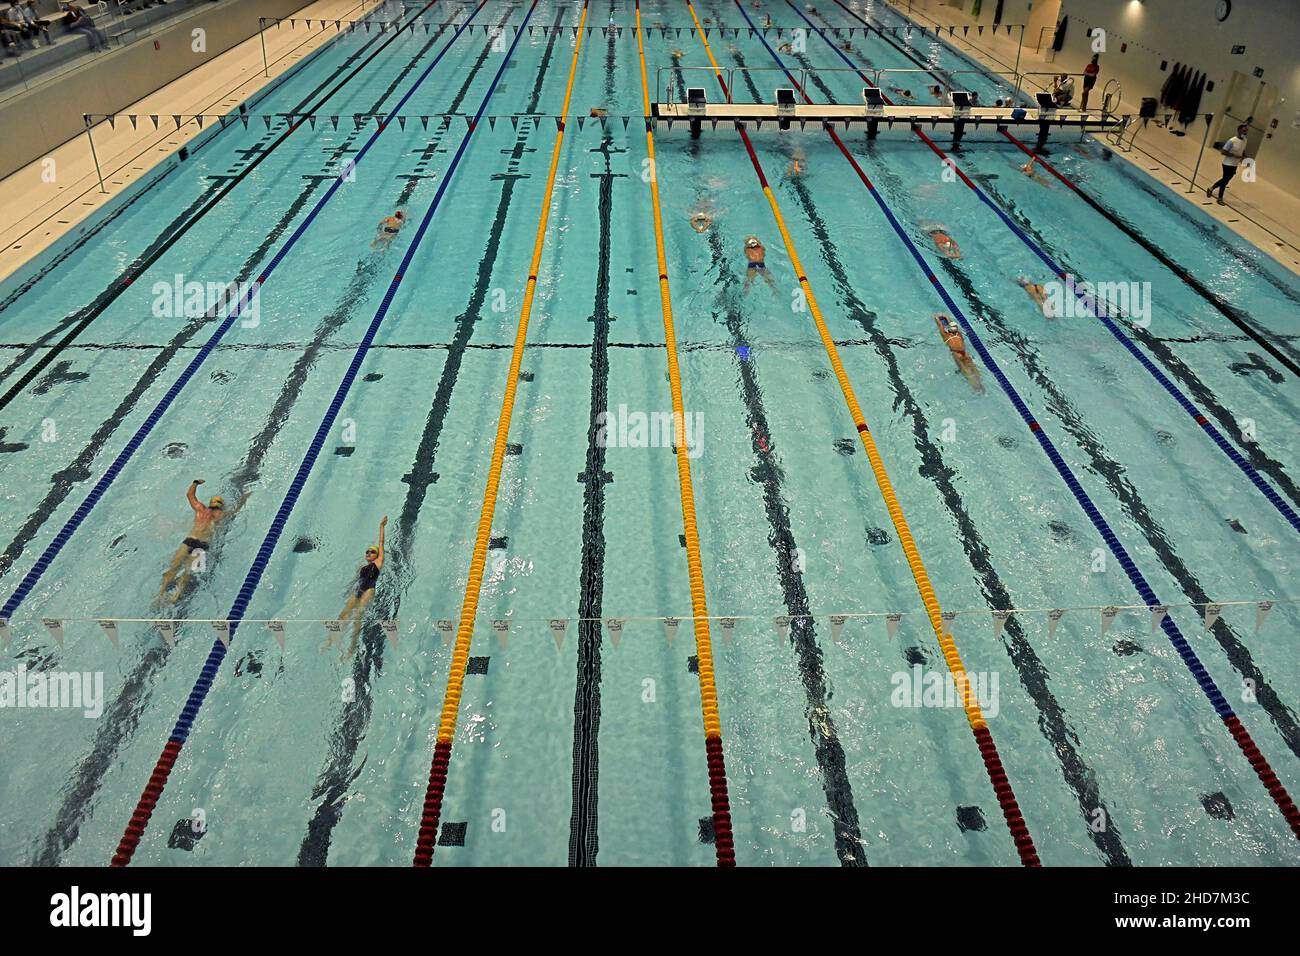 The new indoor olympique swimming pool of the Bocconi University, in Milan. Stock Photo